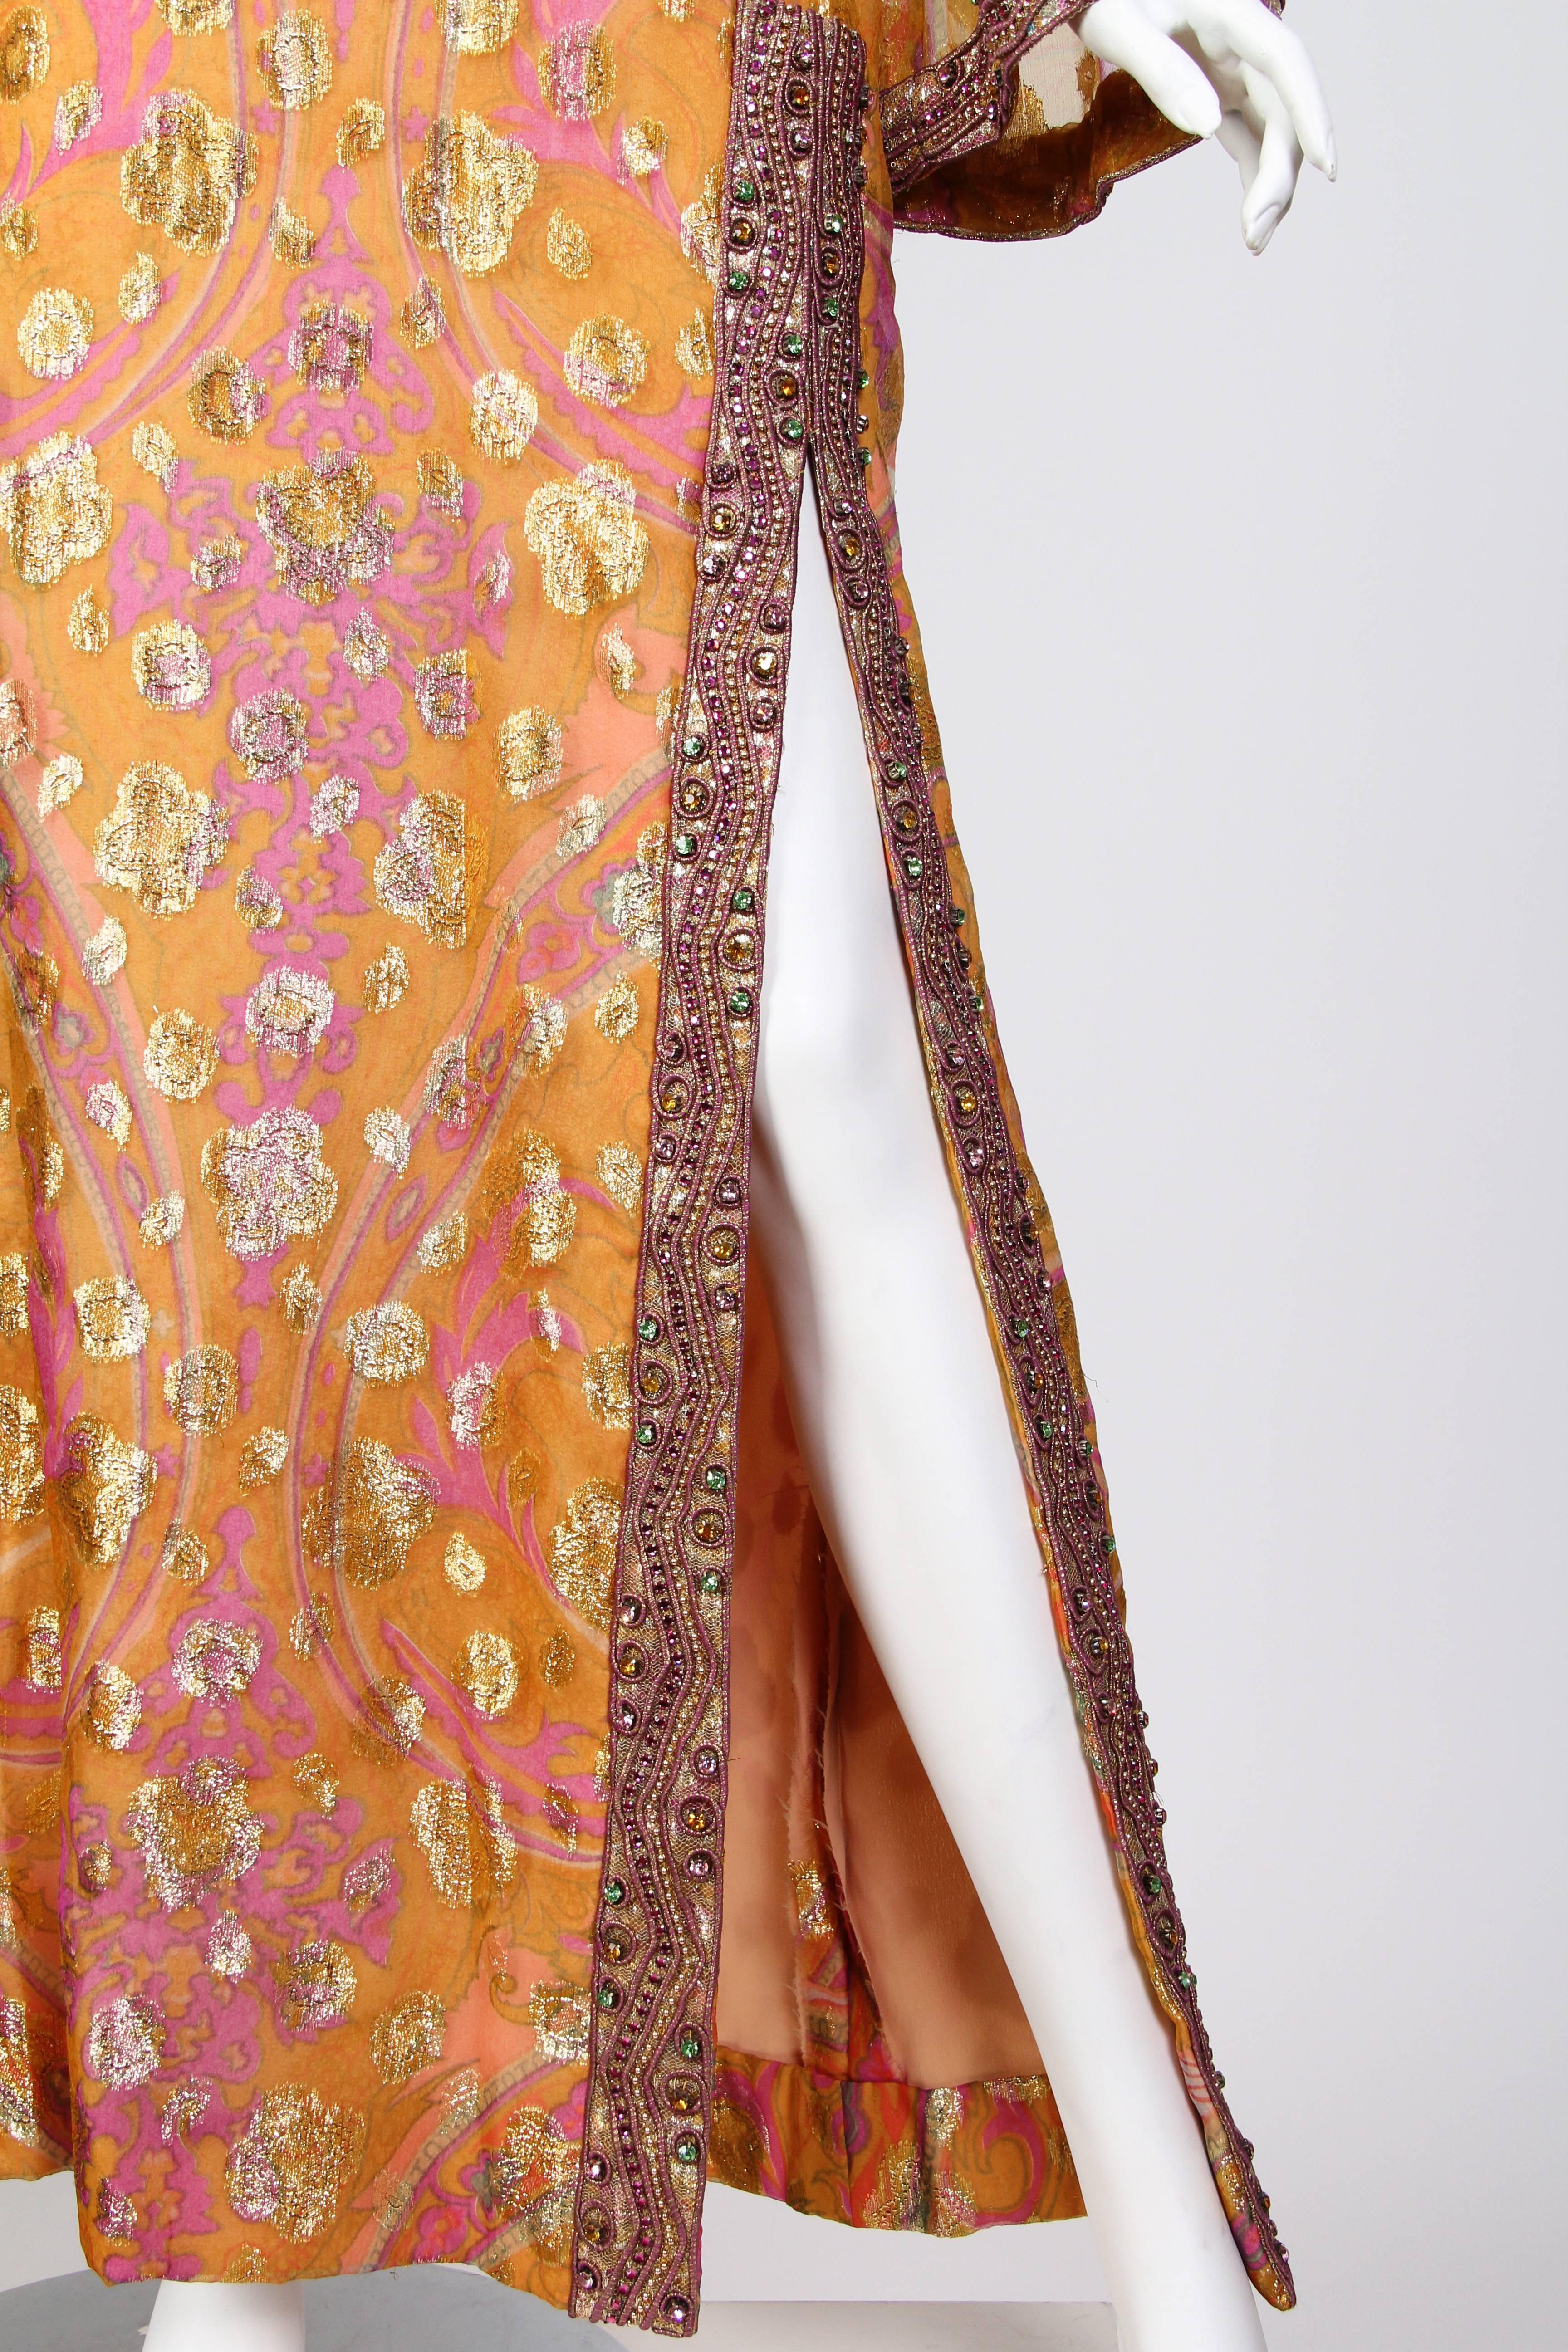 1960s Luxe Bohemian Dress with Crystals 1